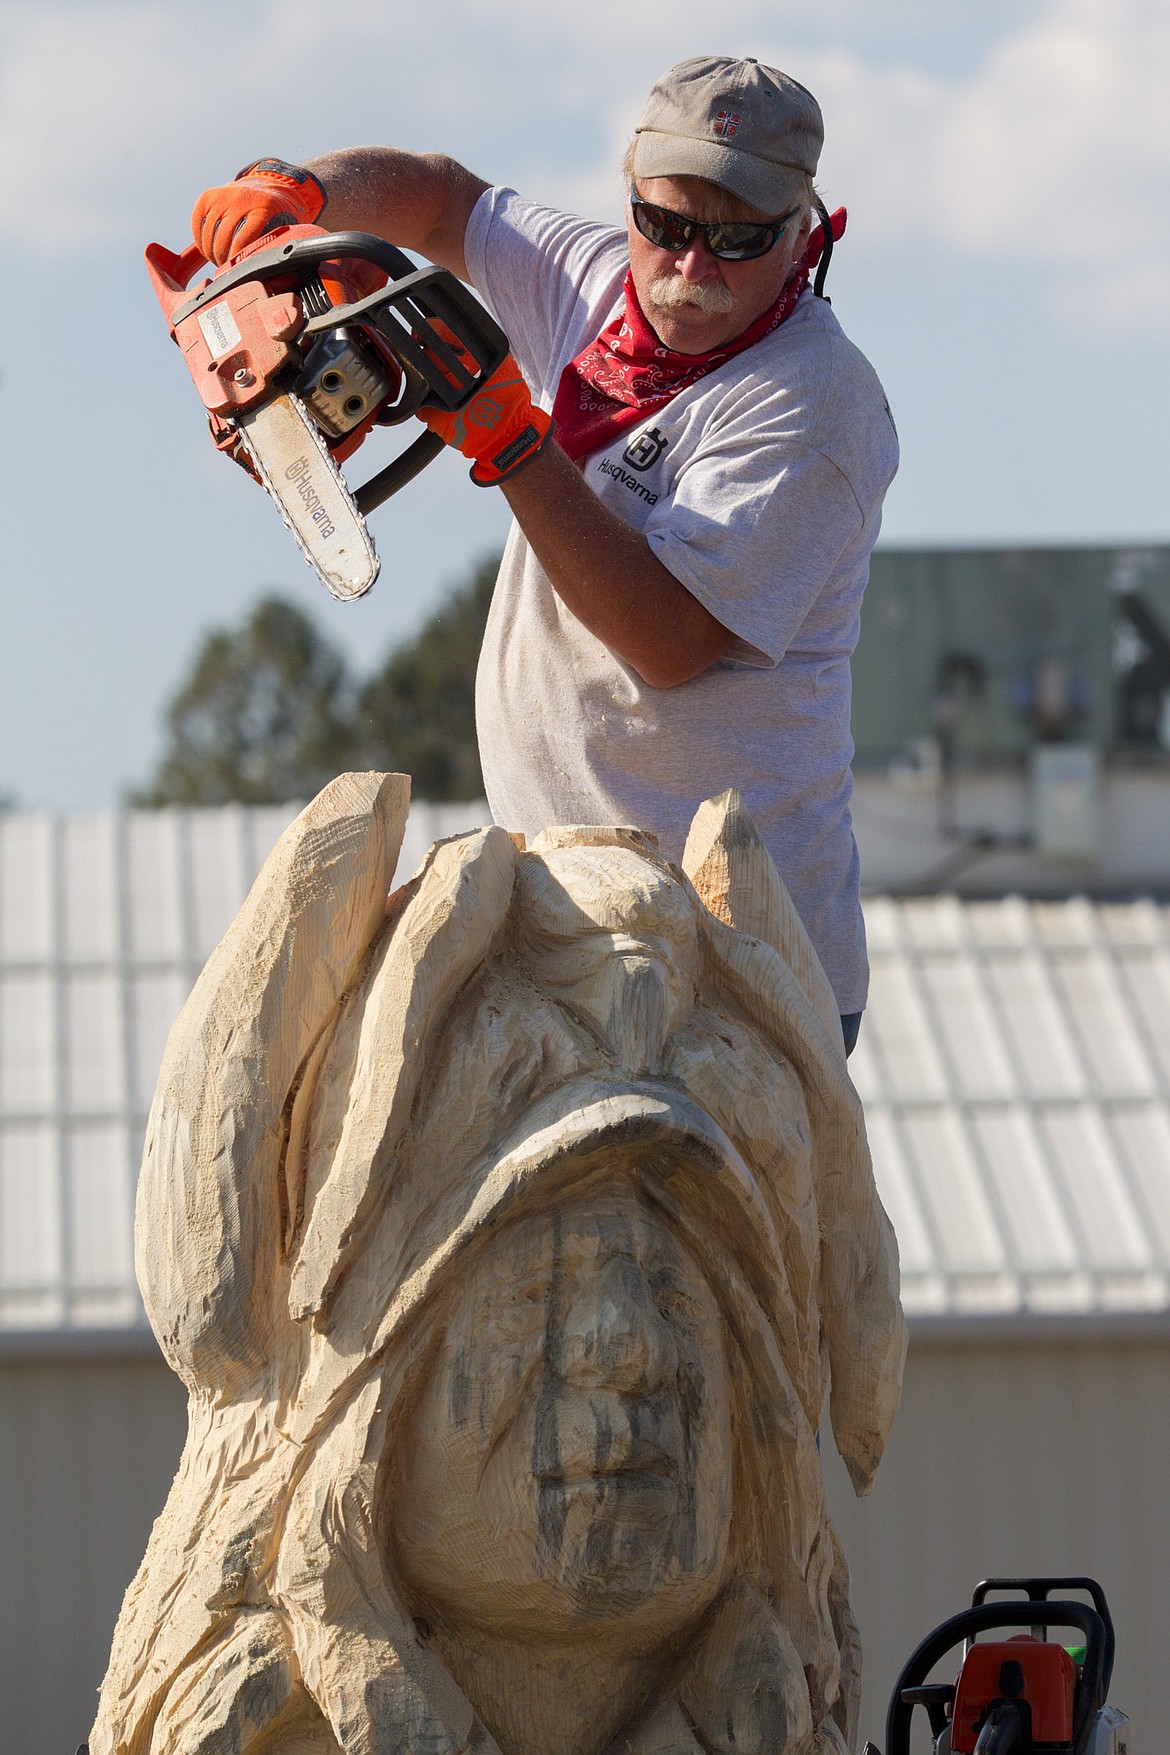 Ron Adamson of Libby competes the Kootenai Country Montana Chainsaw Carving Championship in Libby in 2017. (John Blodgett/The Western News file photo)